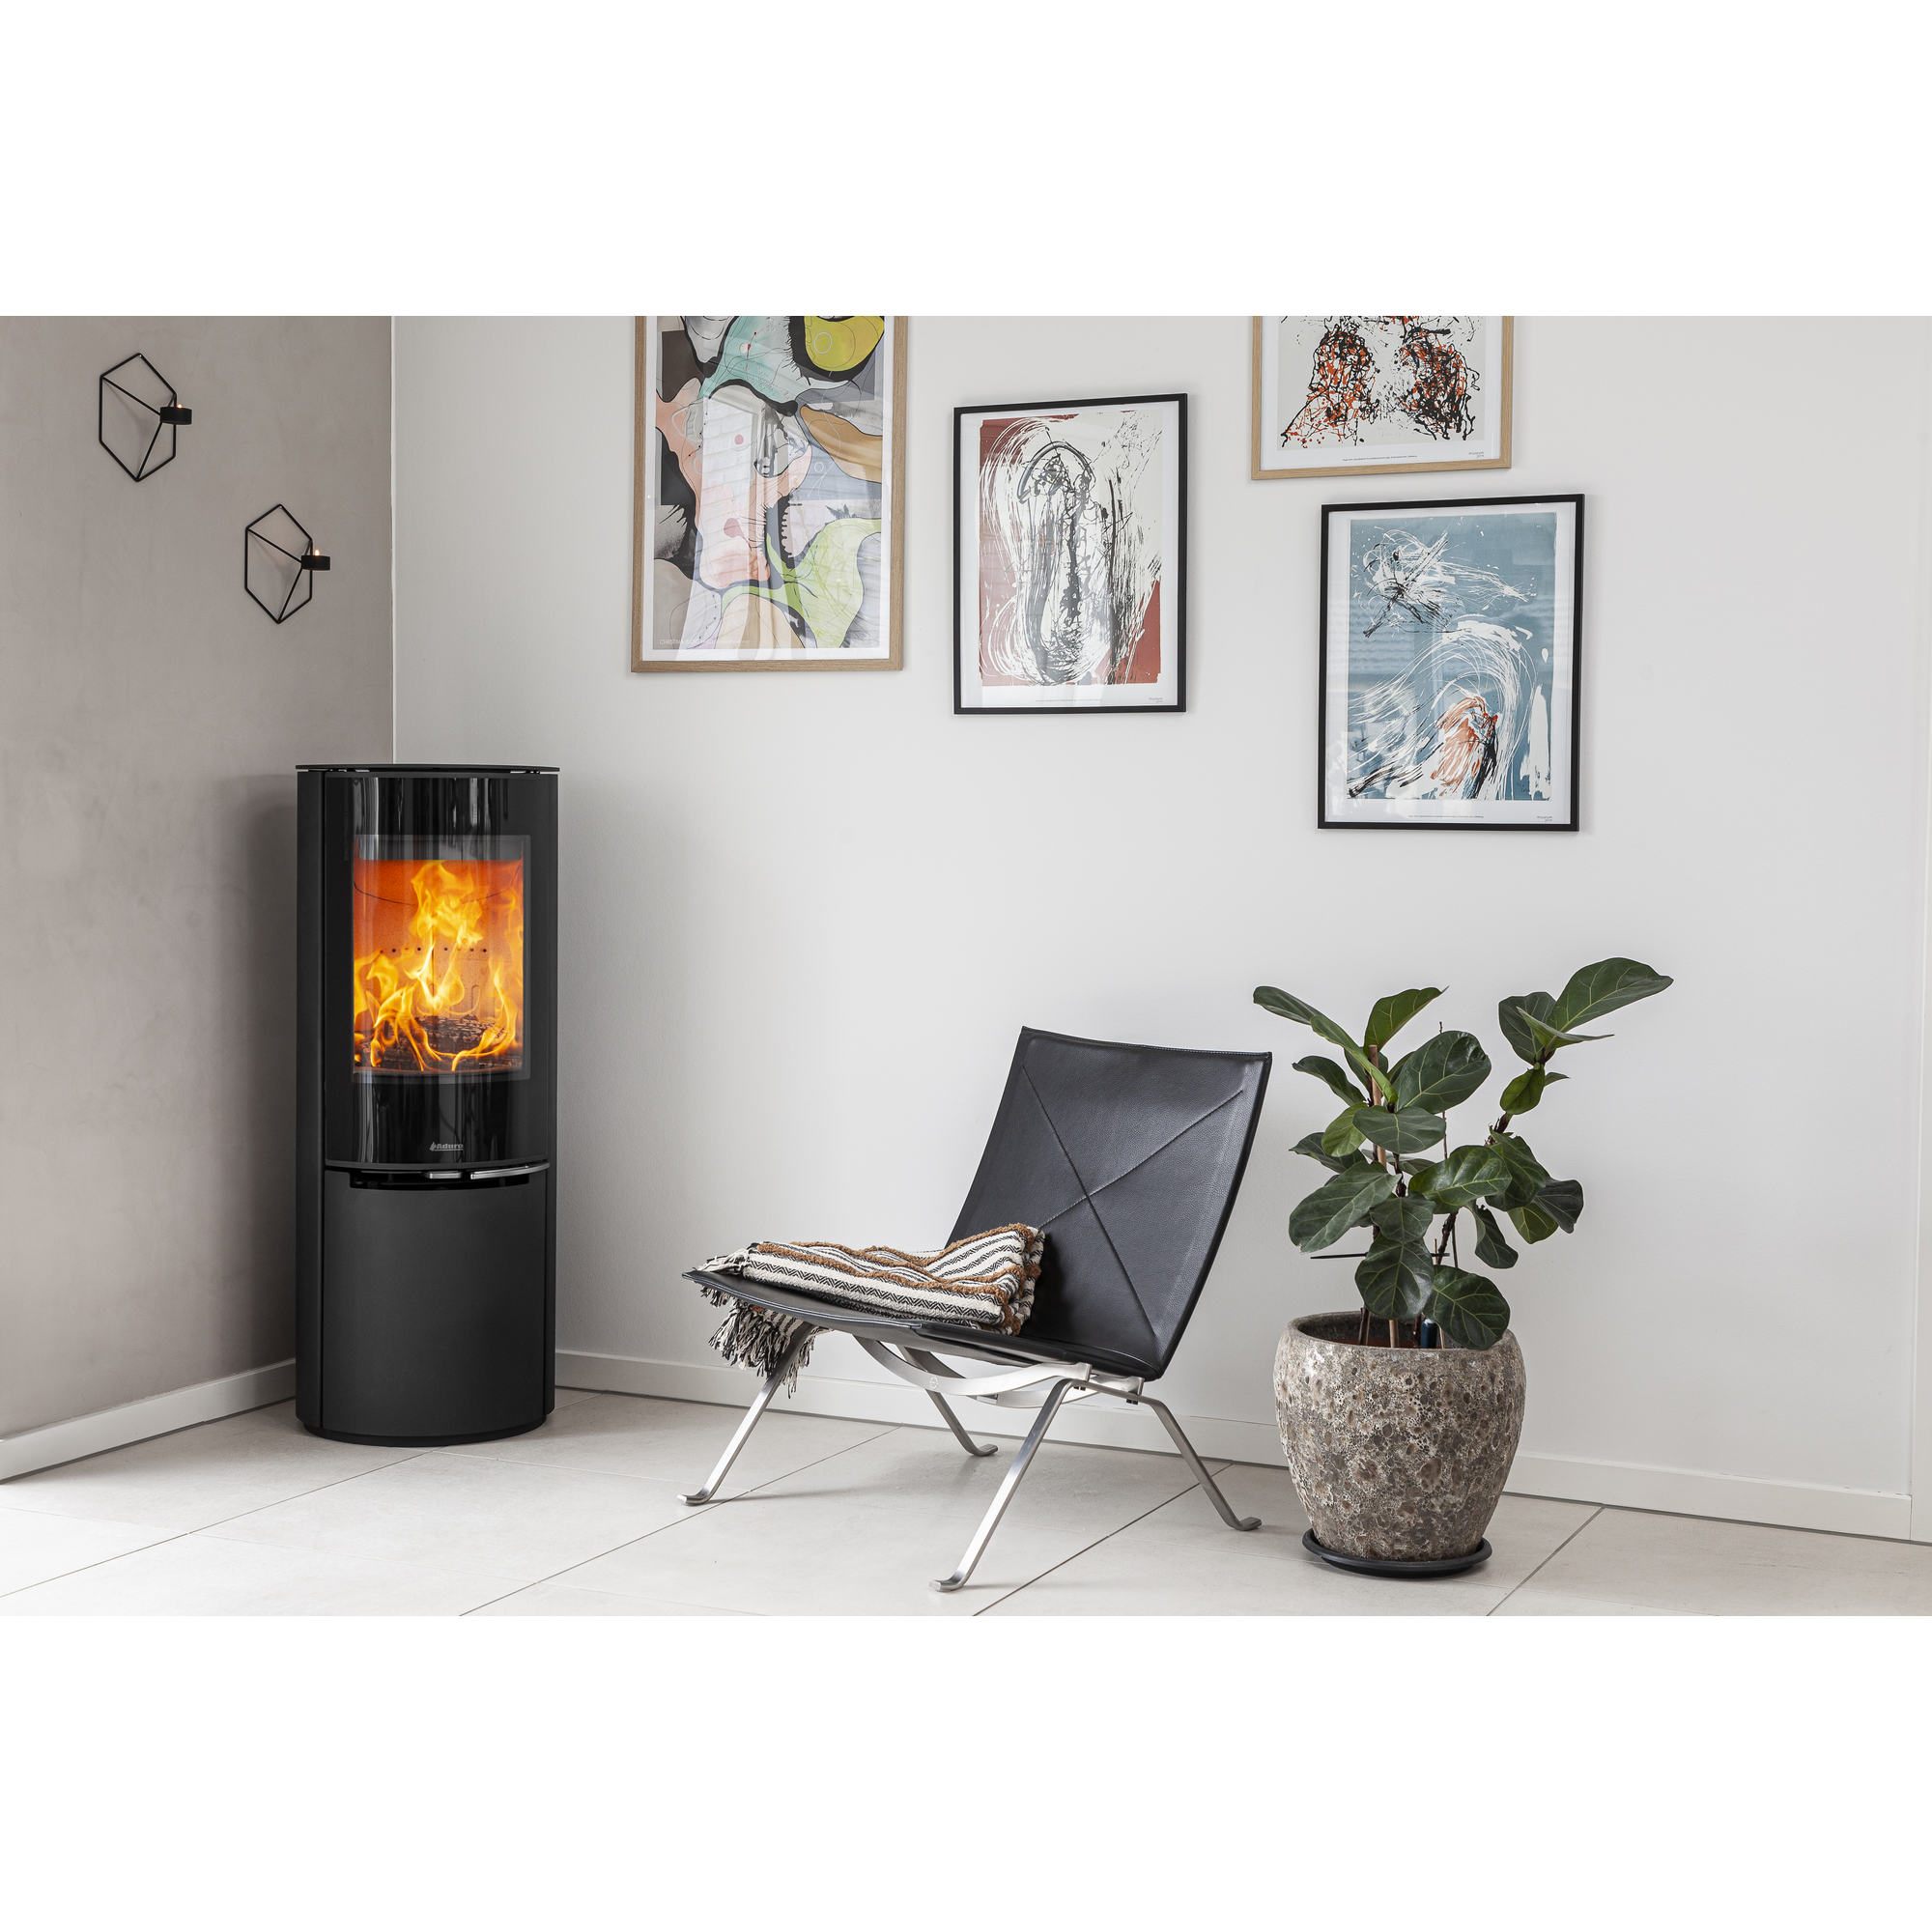 Kaminofen '22.1 Lux' Stahl 5,5 kW + product picture